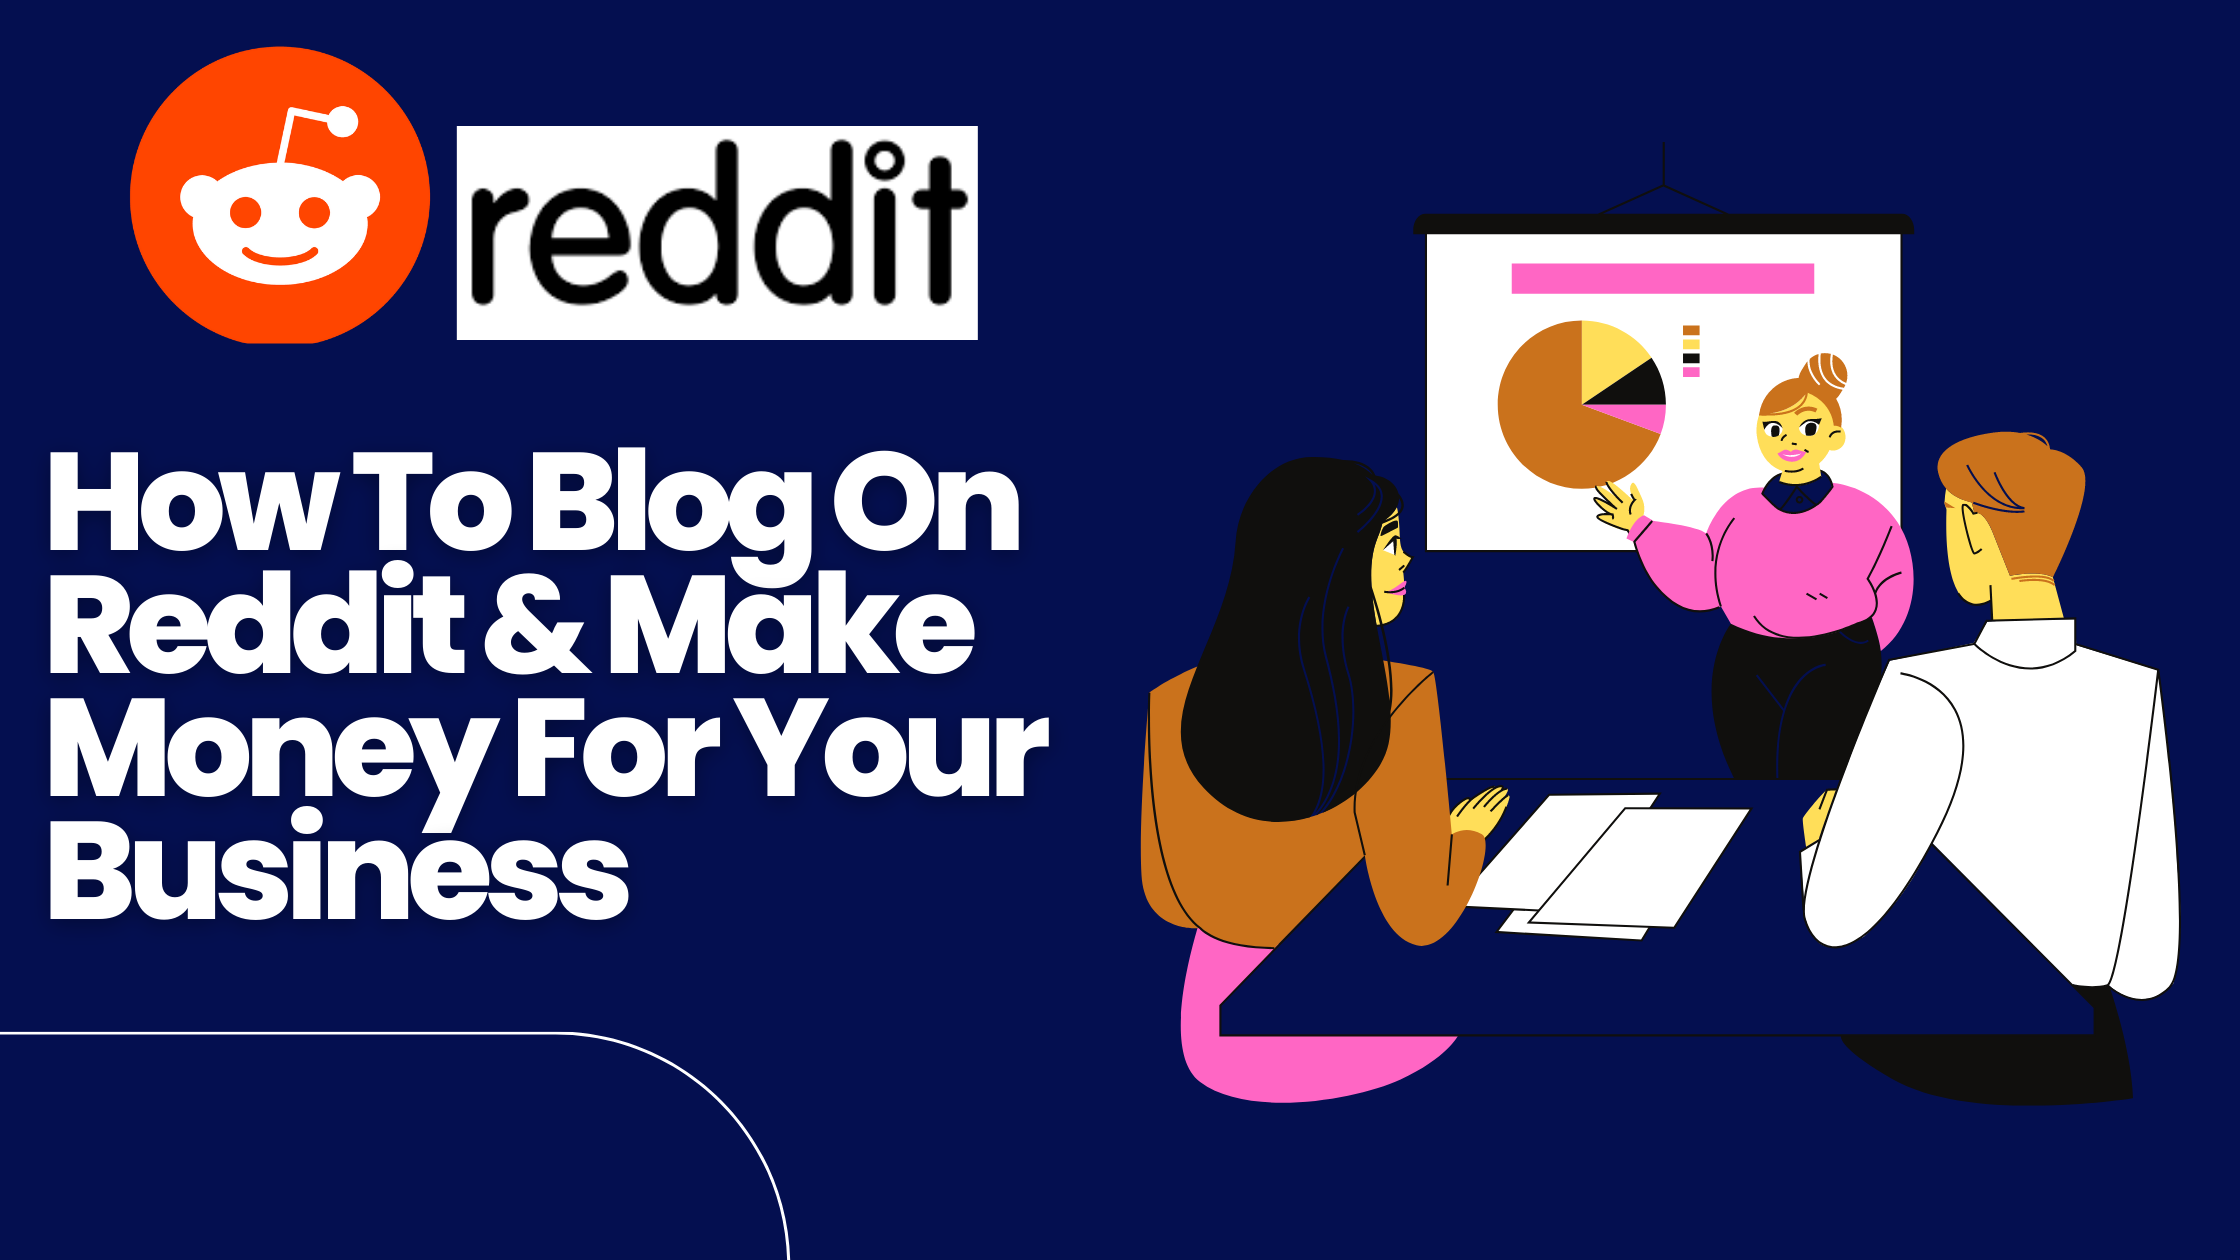 How To Blog On Reddit & Make Money For Your Business